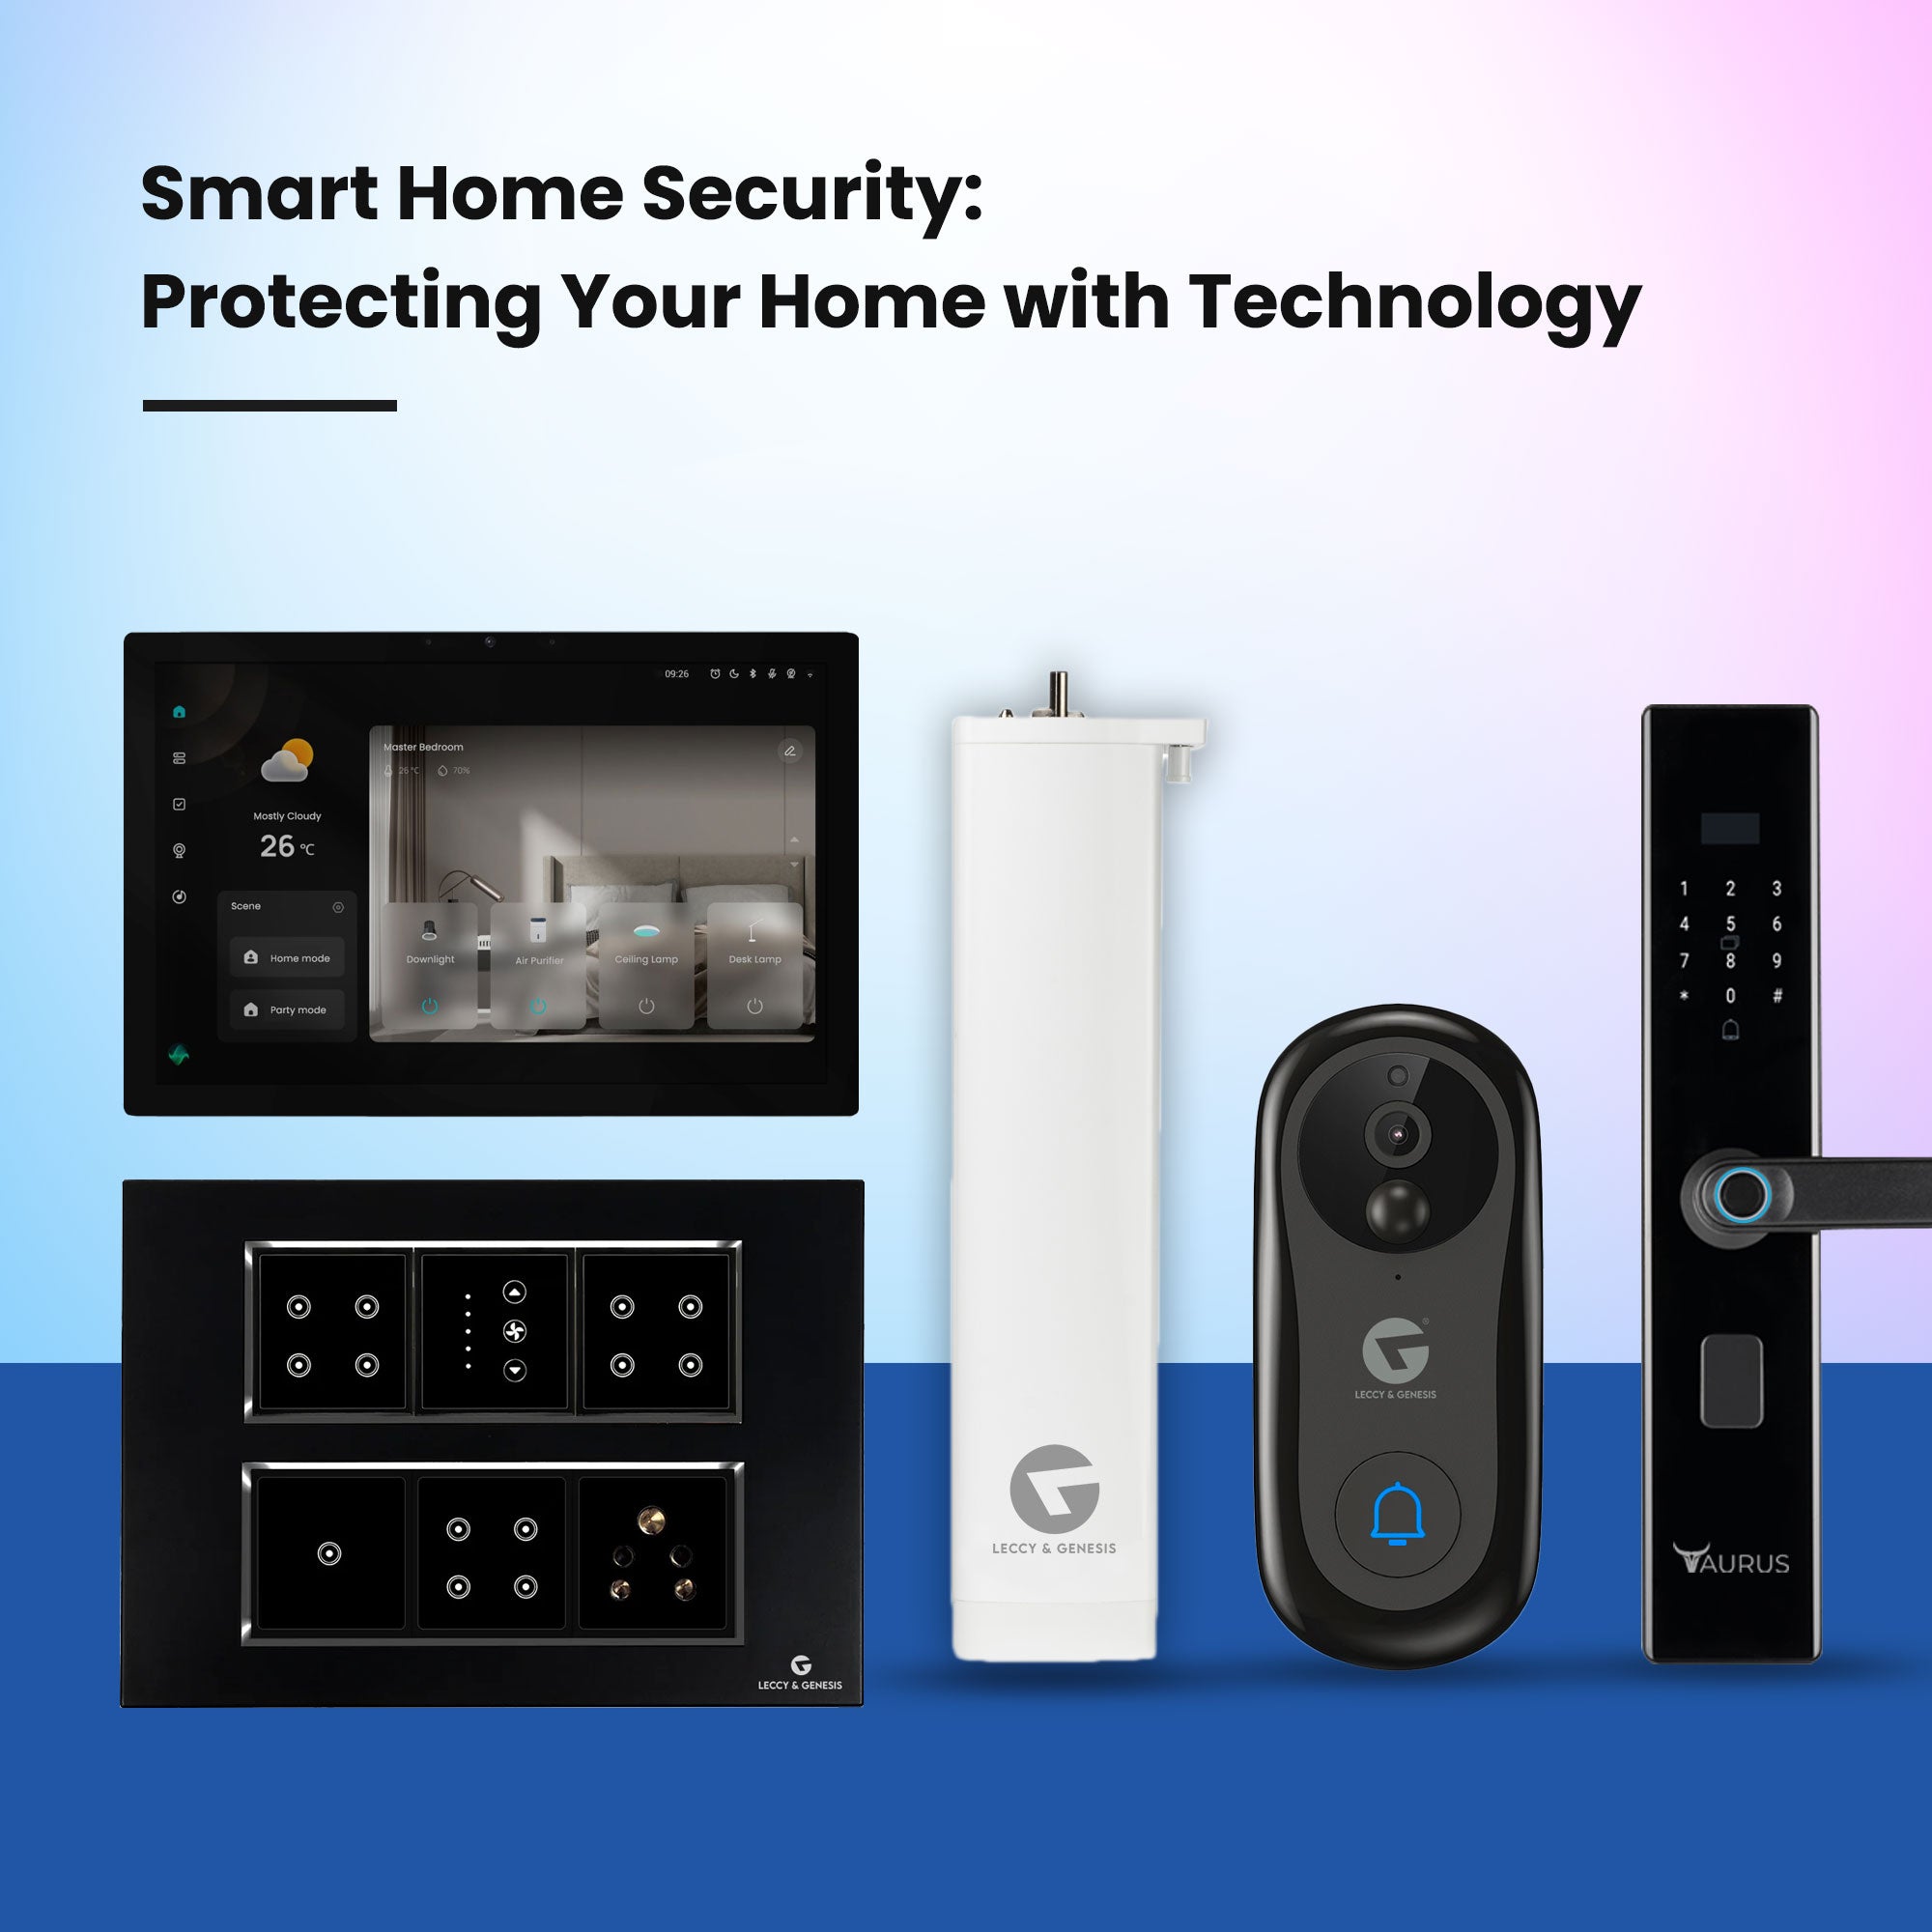 Smart Home Security: Protecting Your Home with Technology